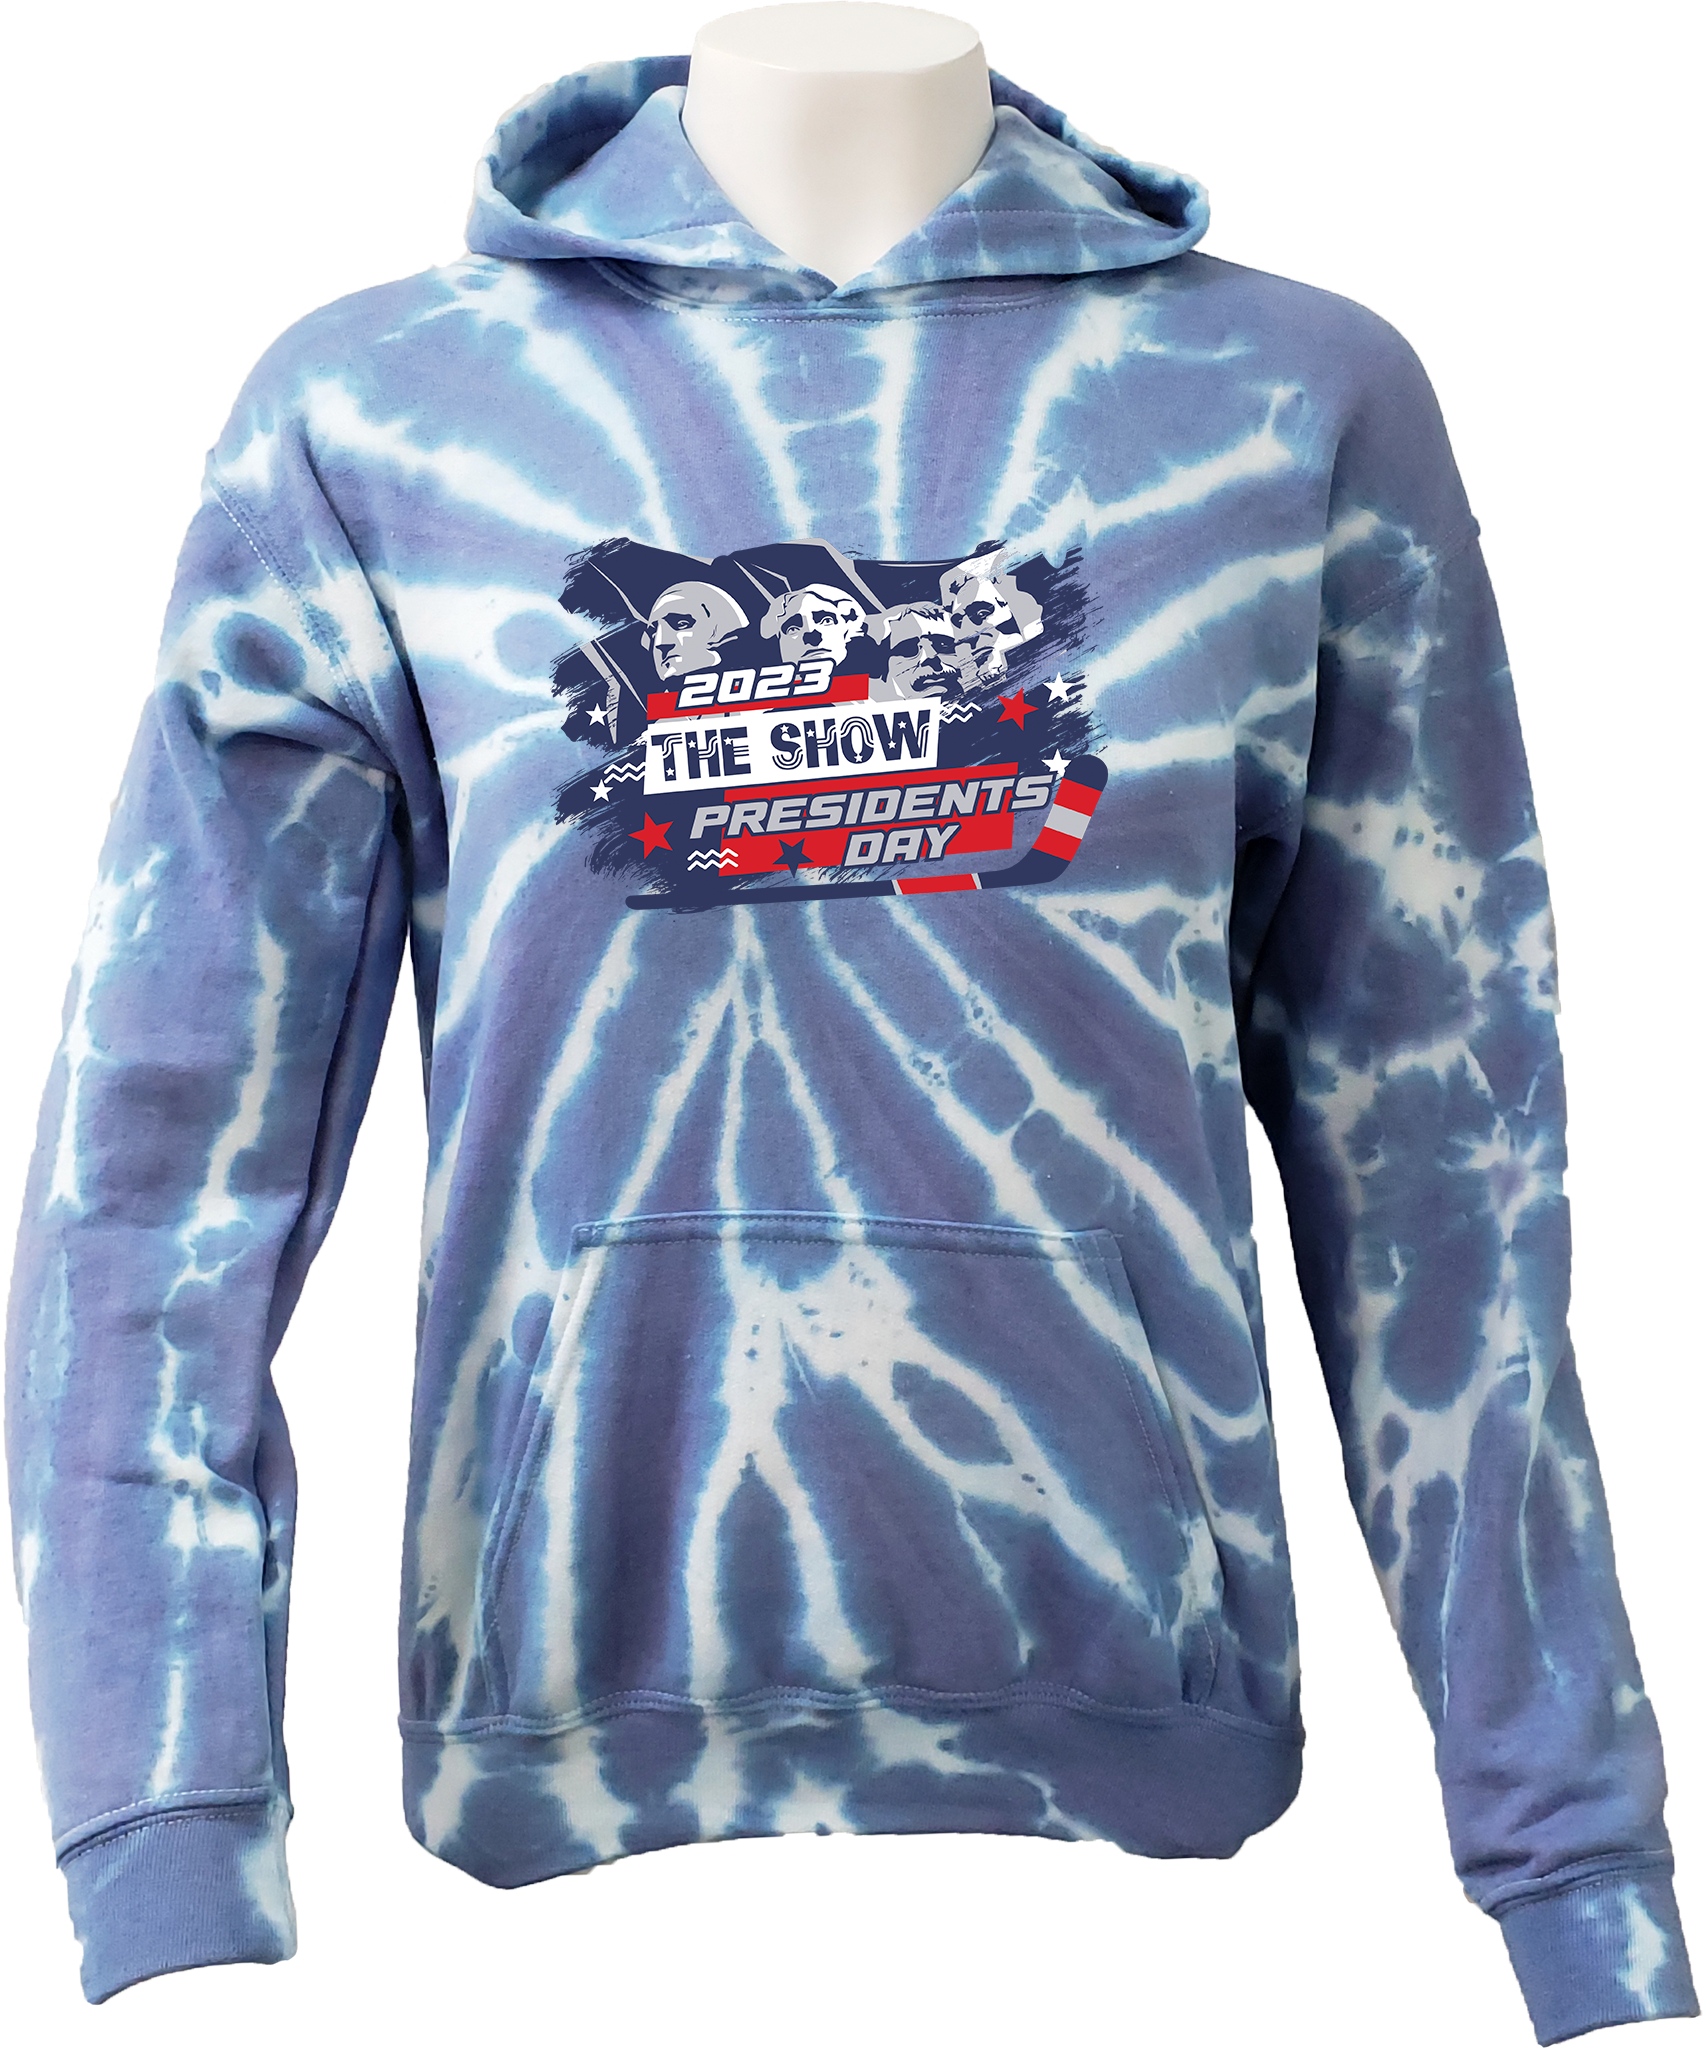 TIE-DYE HOODIES - 2023 The Show President's Day